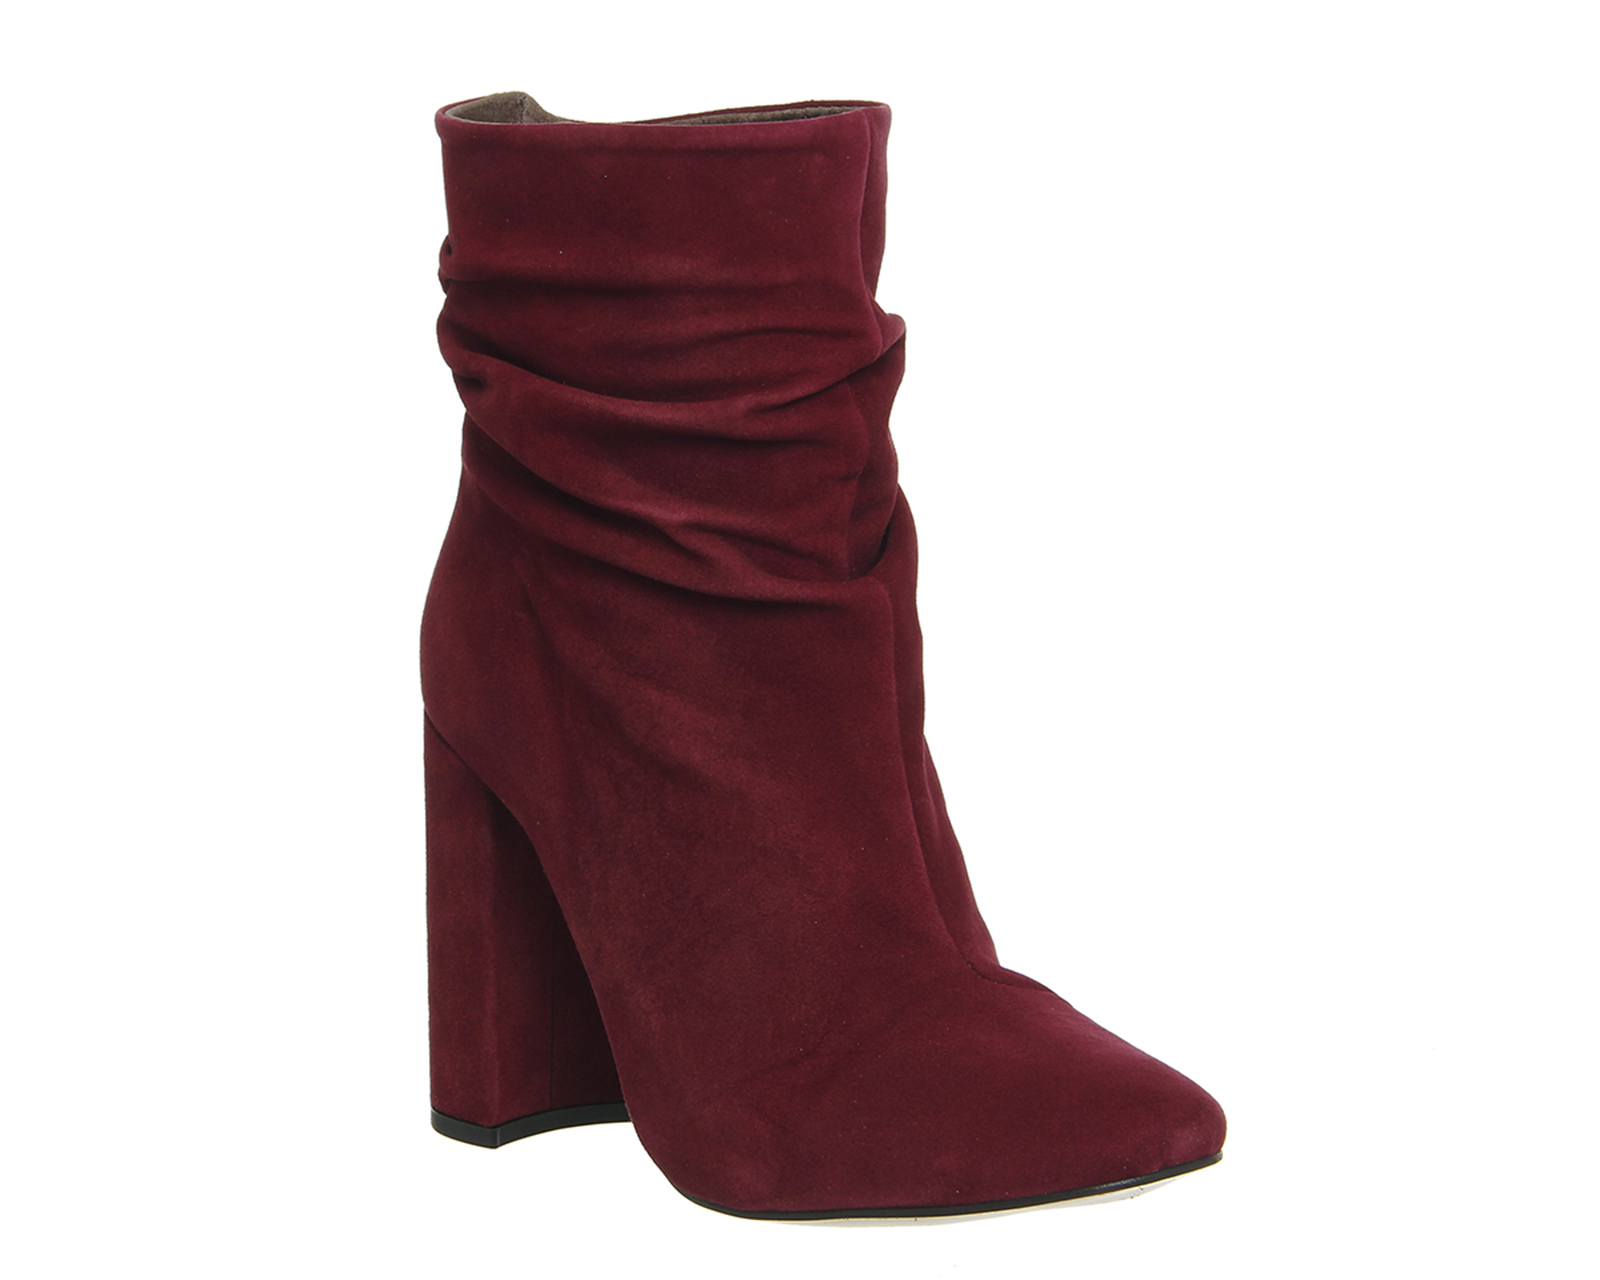 OFFICEInfamous Slouch BootsBurgundy Suede